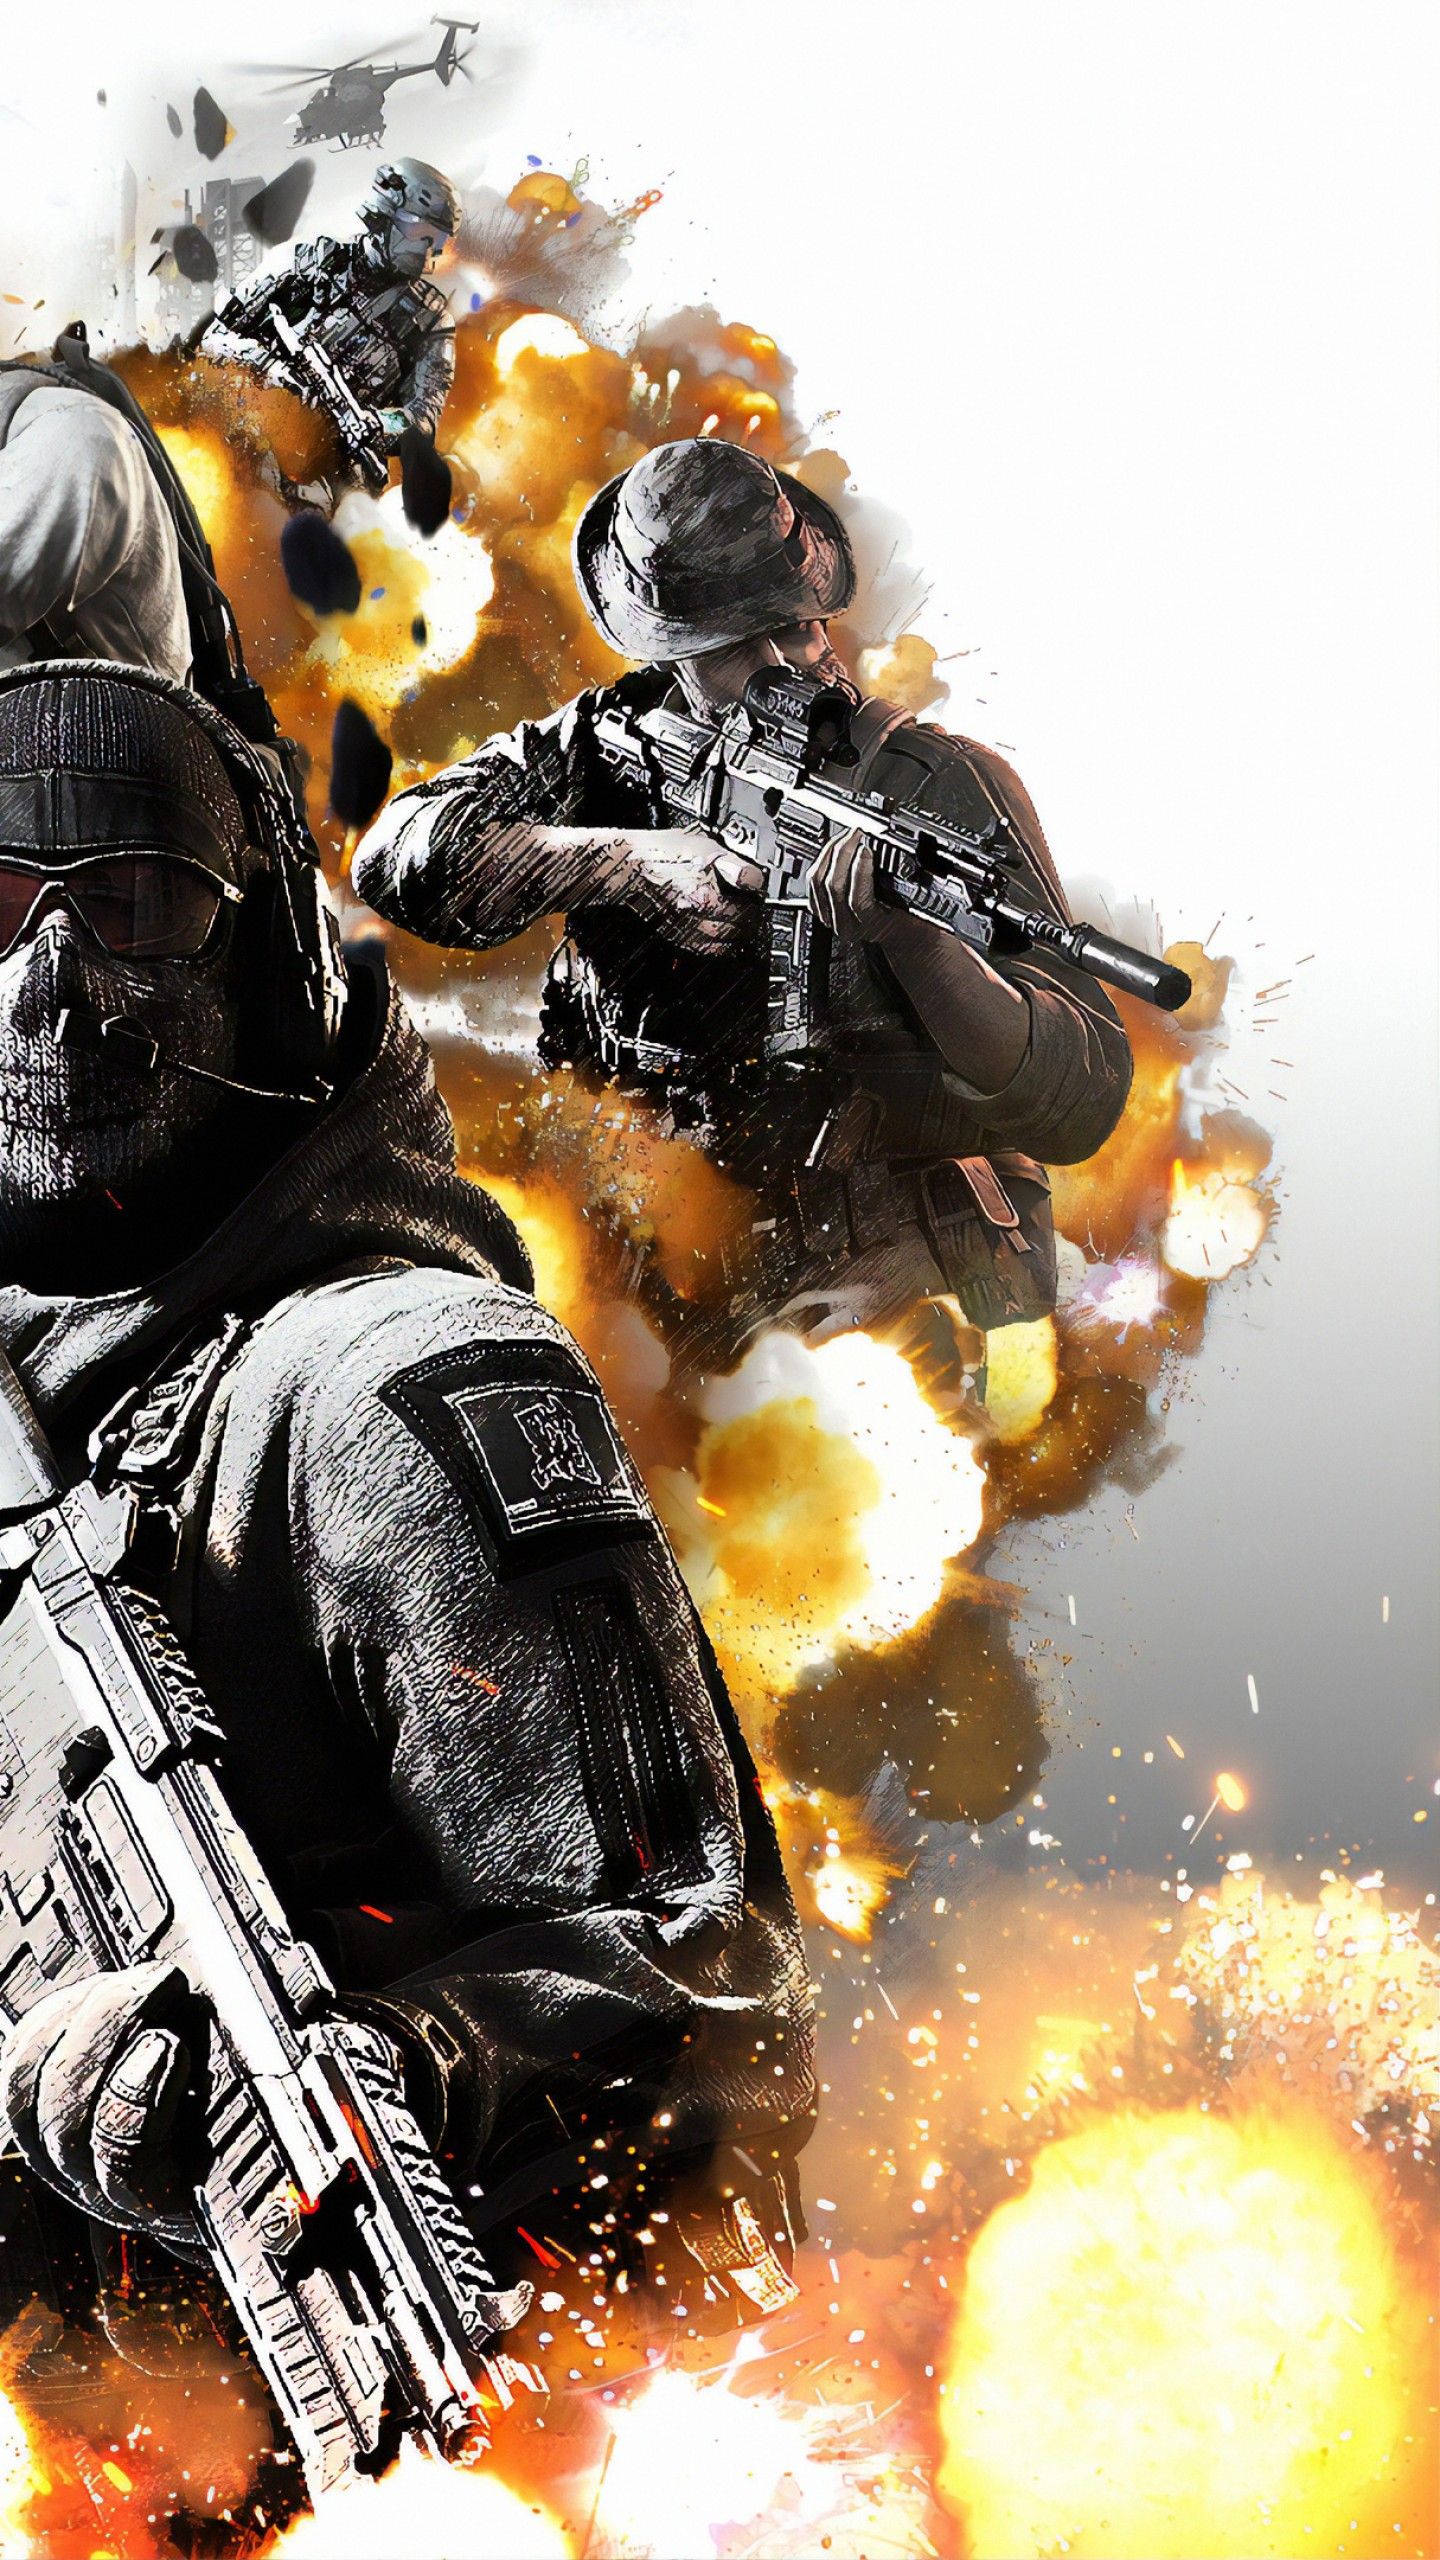 call of duty mobile 2021 apk